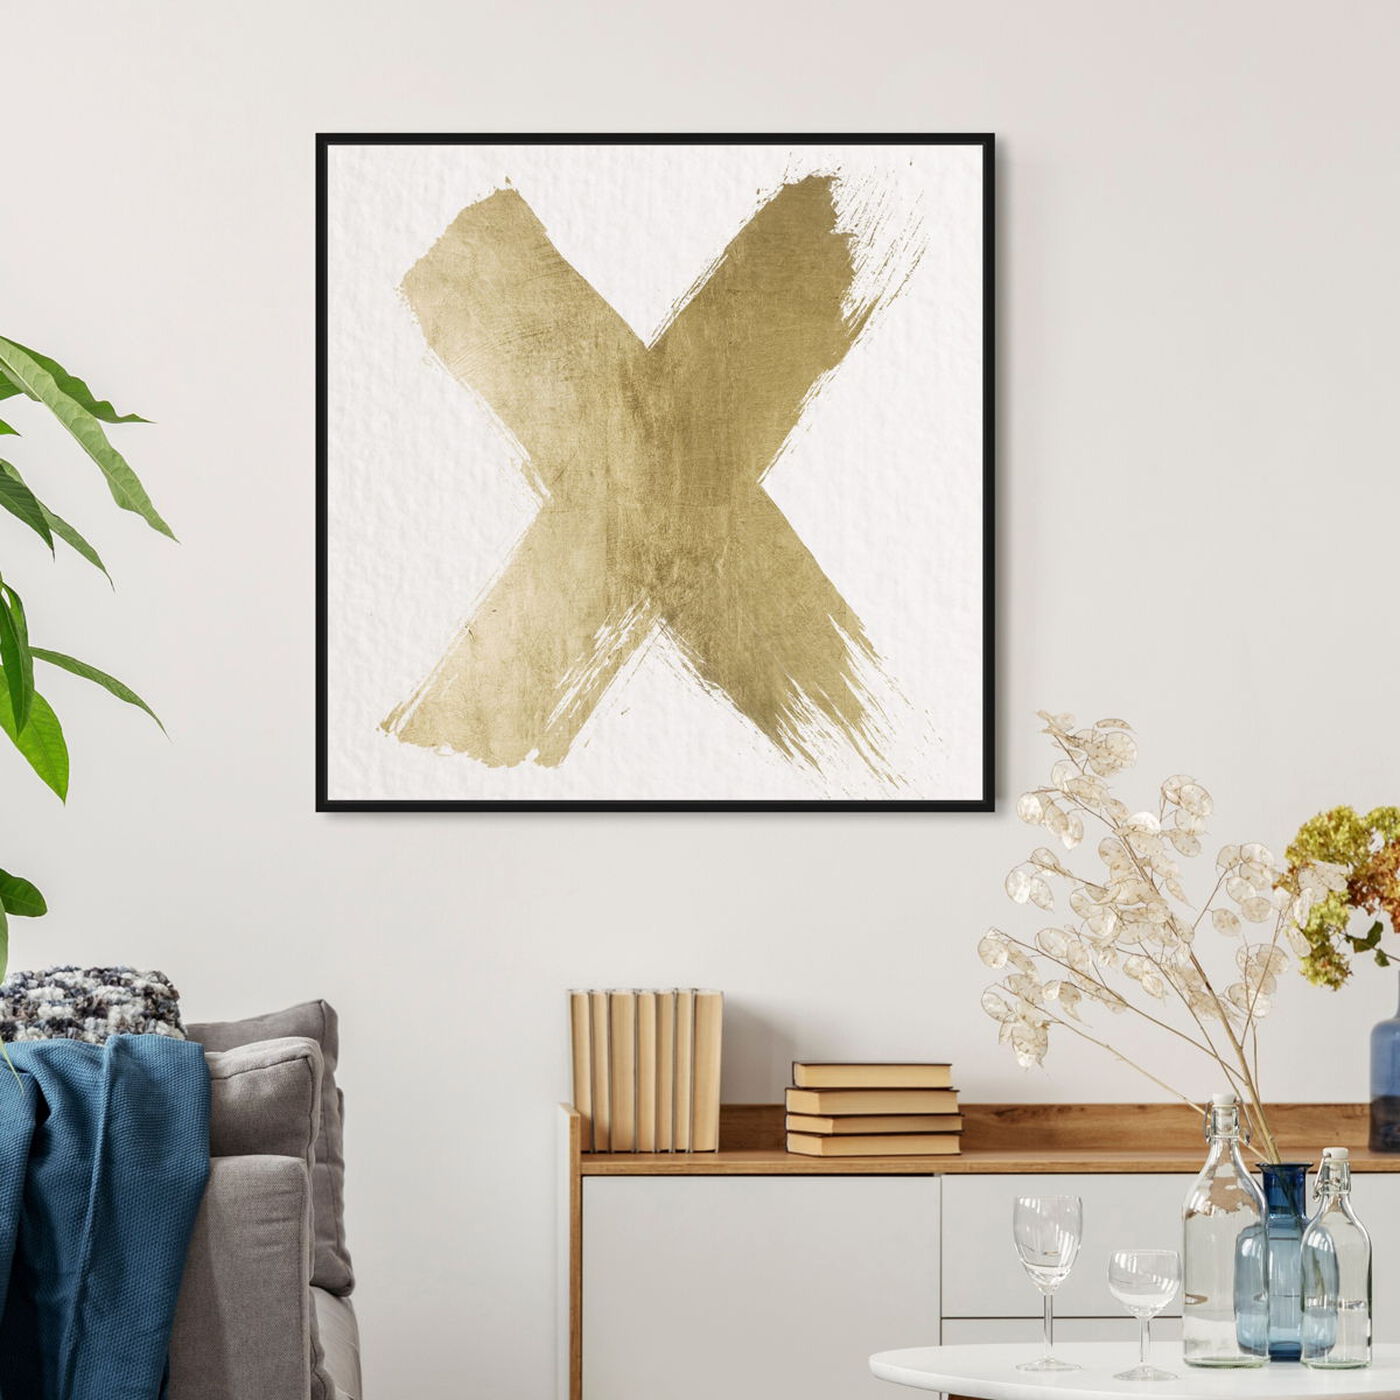 Hanging view of X of featuring symbols and objects and symbols art.